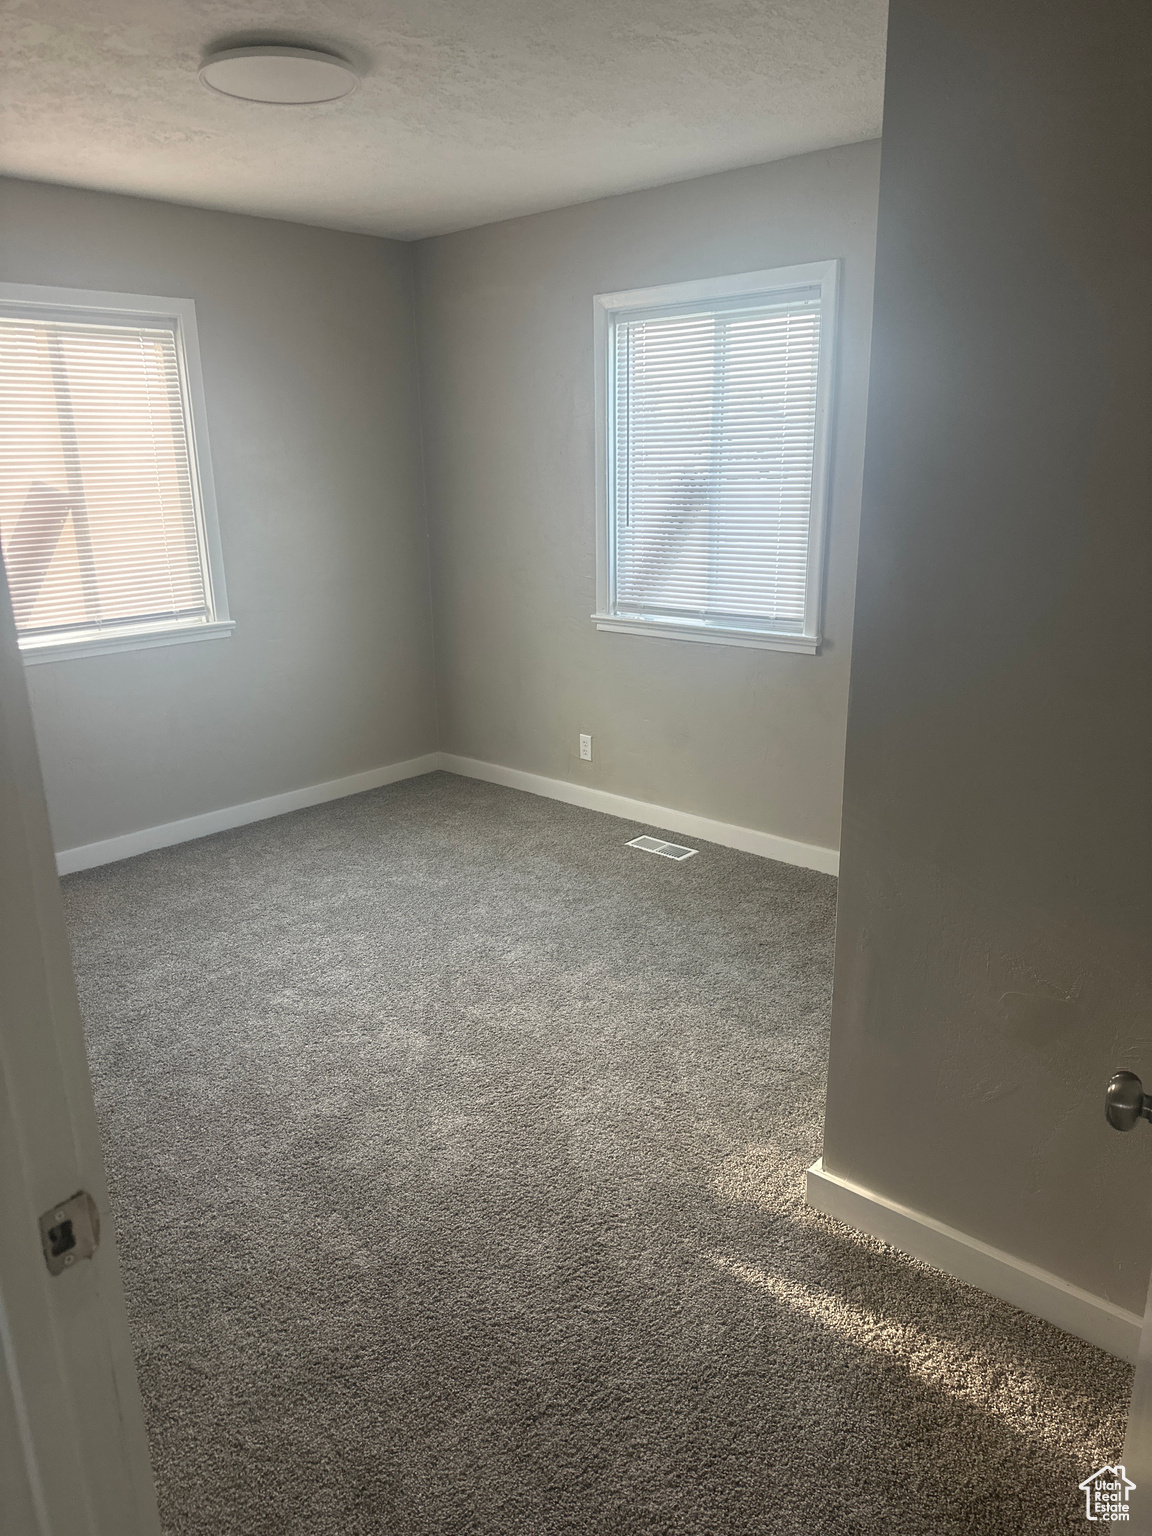 Carpeted spare room featuring a healthy amount of sunlight